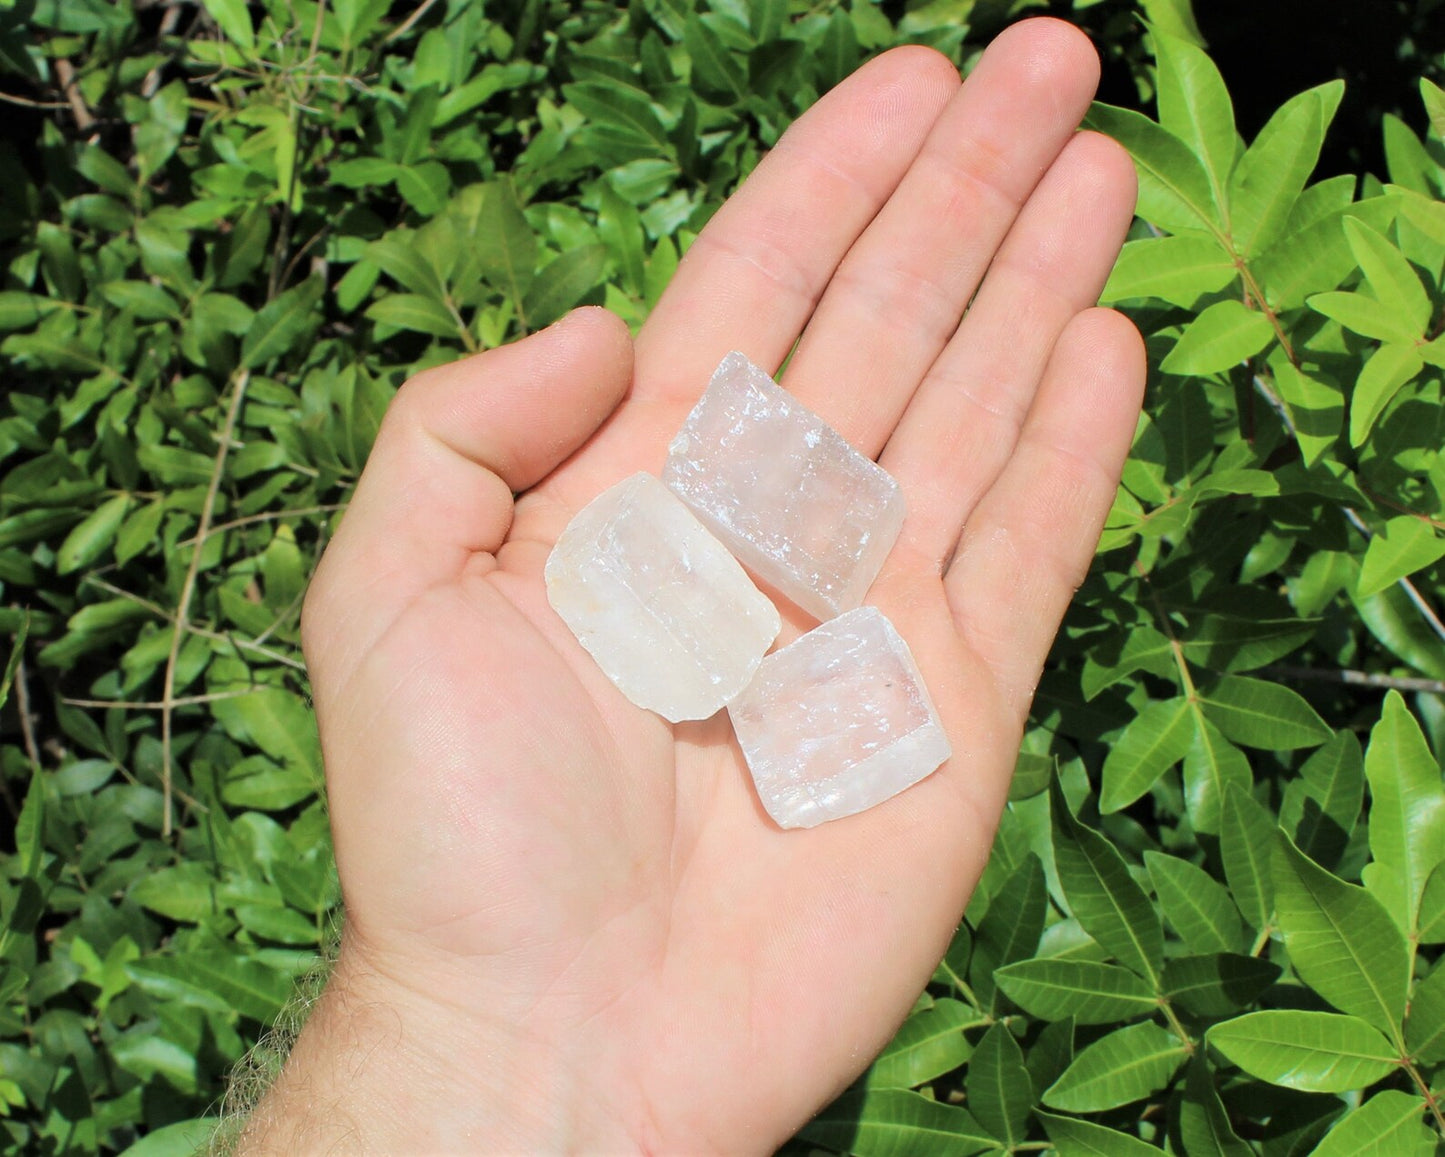 Raw Natural Clear Calcite Crystals